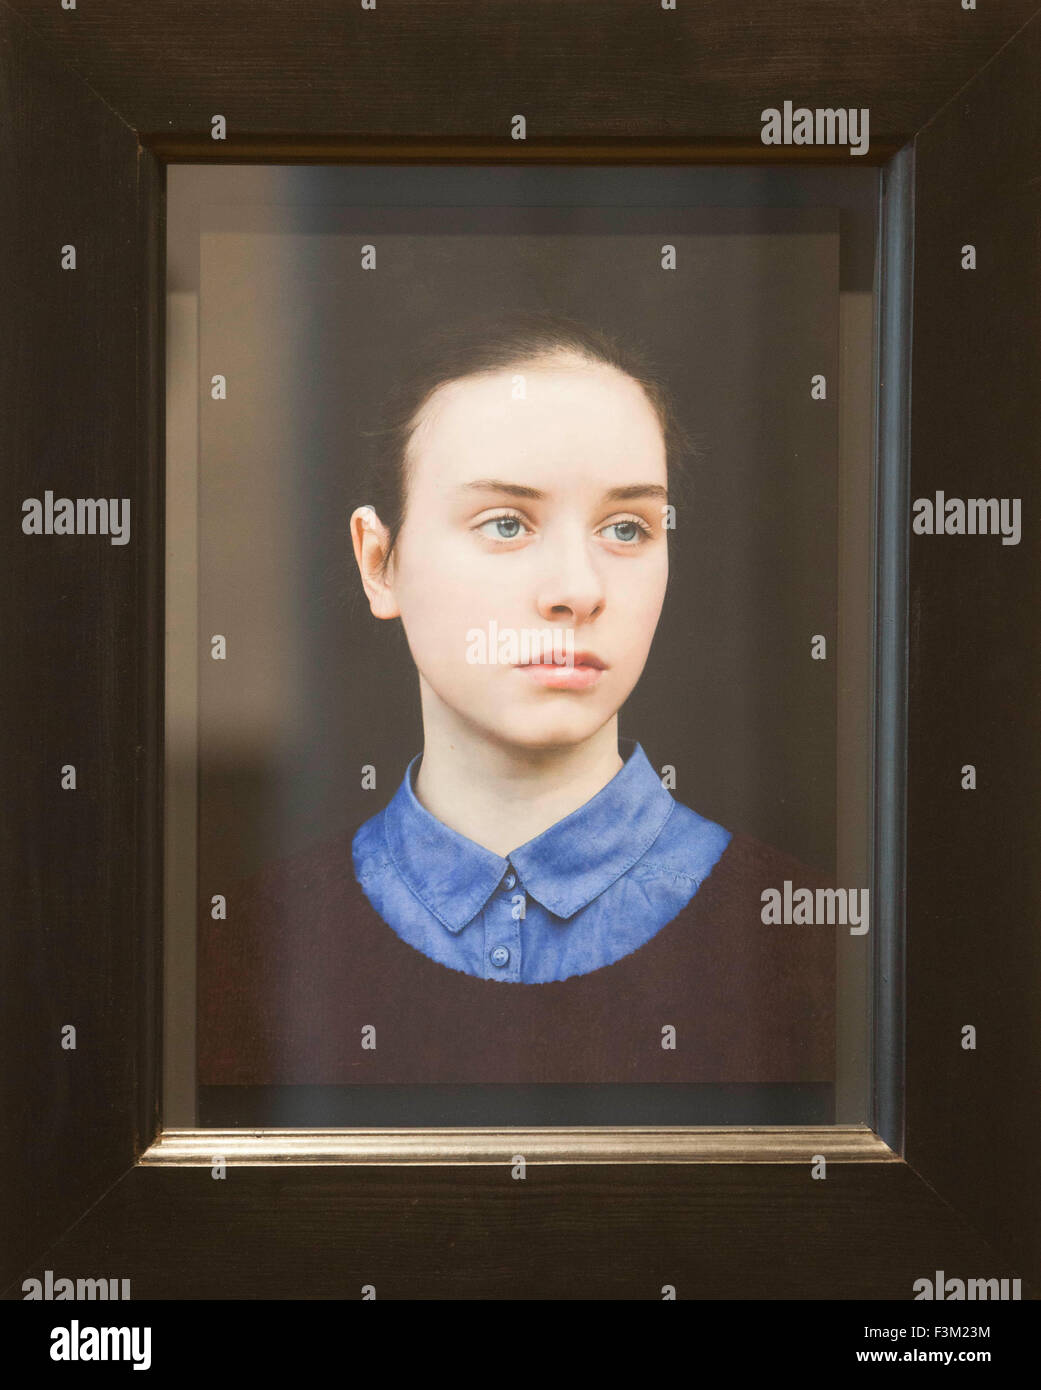 Edinburgh.UK. 9th October. BP Portrait Display in Scottish National Portrait Gallery. BP Portrait Award display in Edinburgh 10 October 2015 - 28 February 2016. Pictured 2nd Prize frame called Eliza. A portrait of his Niece by Michael Gaskell. Pako Mera/Alamy Live News. Stock Photo